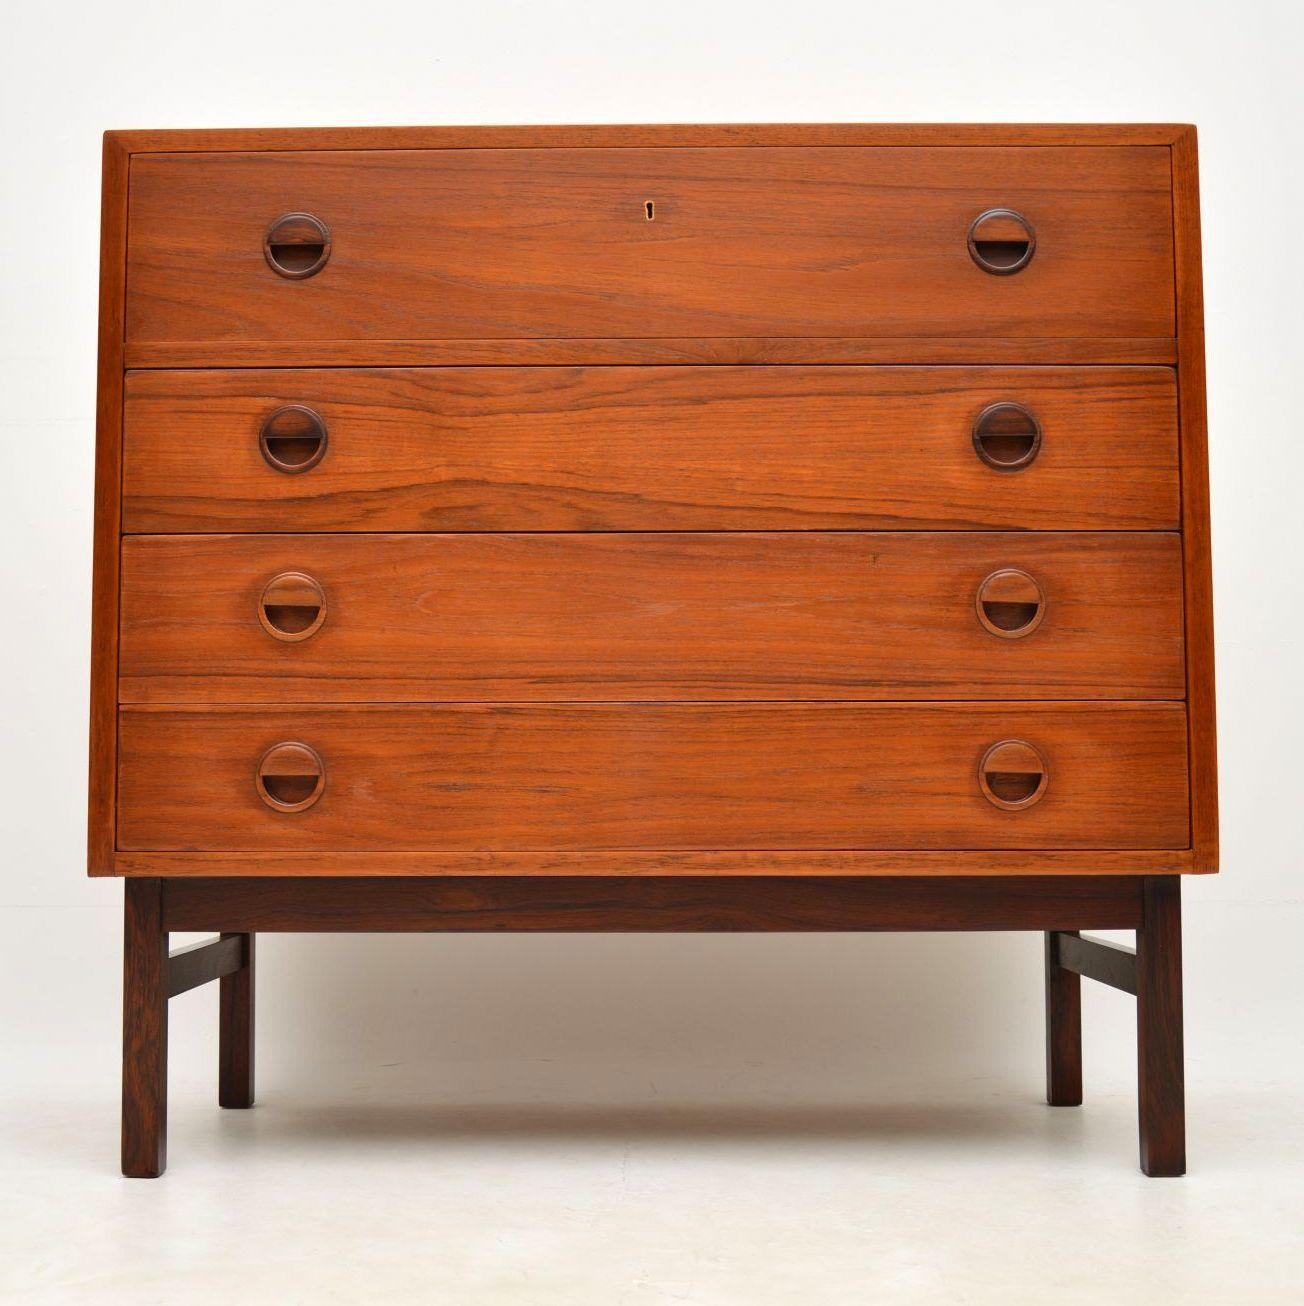 A stunning and unusual design, this vintage Danish chest from the 1960s has a built in secretaire bureau in the top drawer. It’s made from a combination of teak and wood. The quality is amazing and we have had this stripped and re-polished to a very